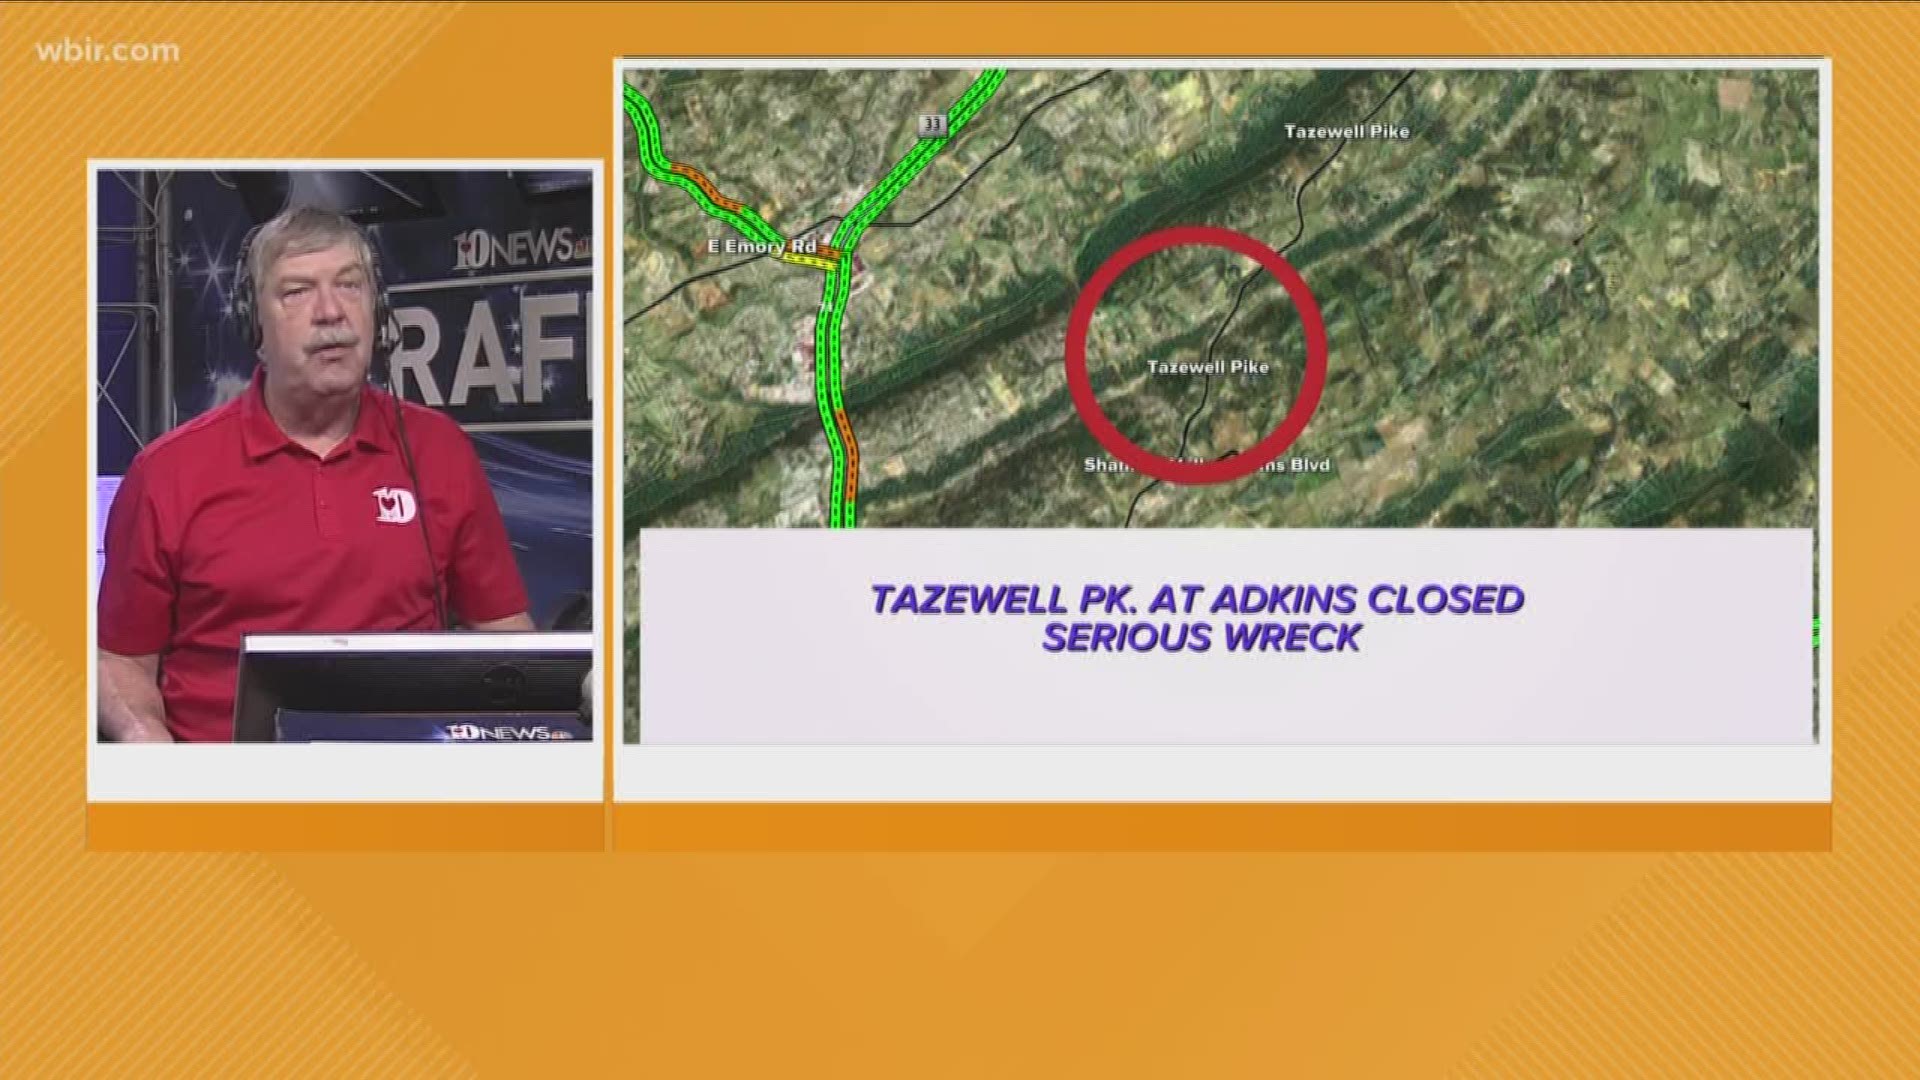 Tazewell Pike will be closed so find an alternate route if you travel that direction Tuesday morning.